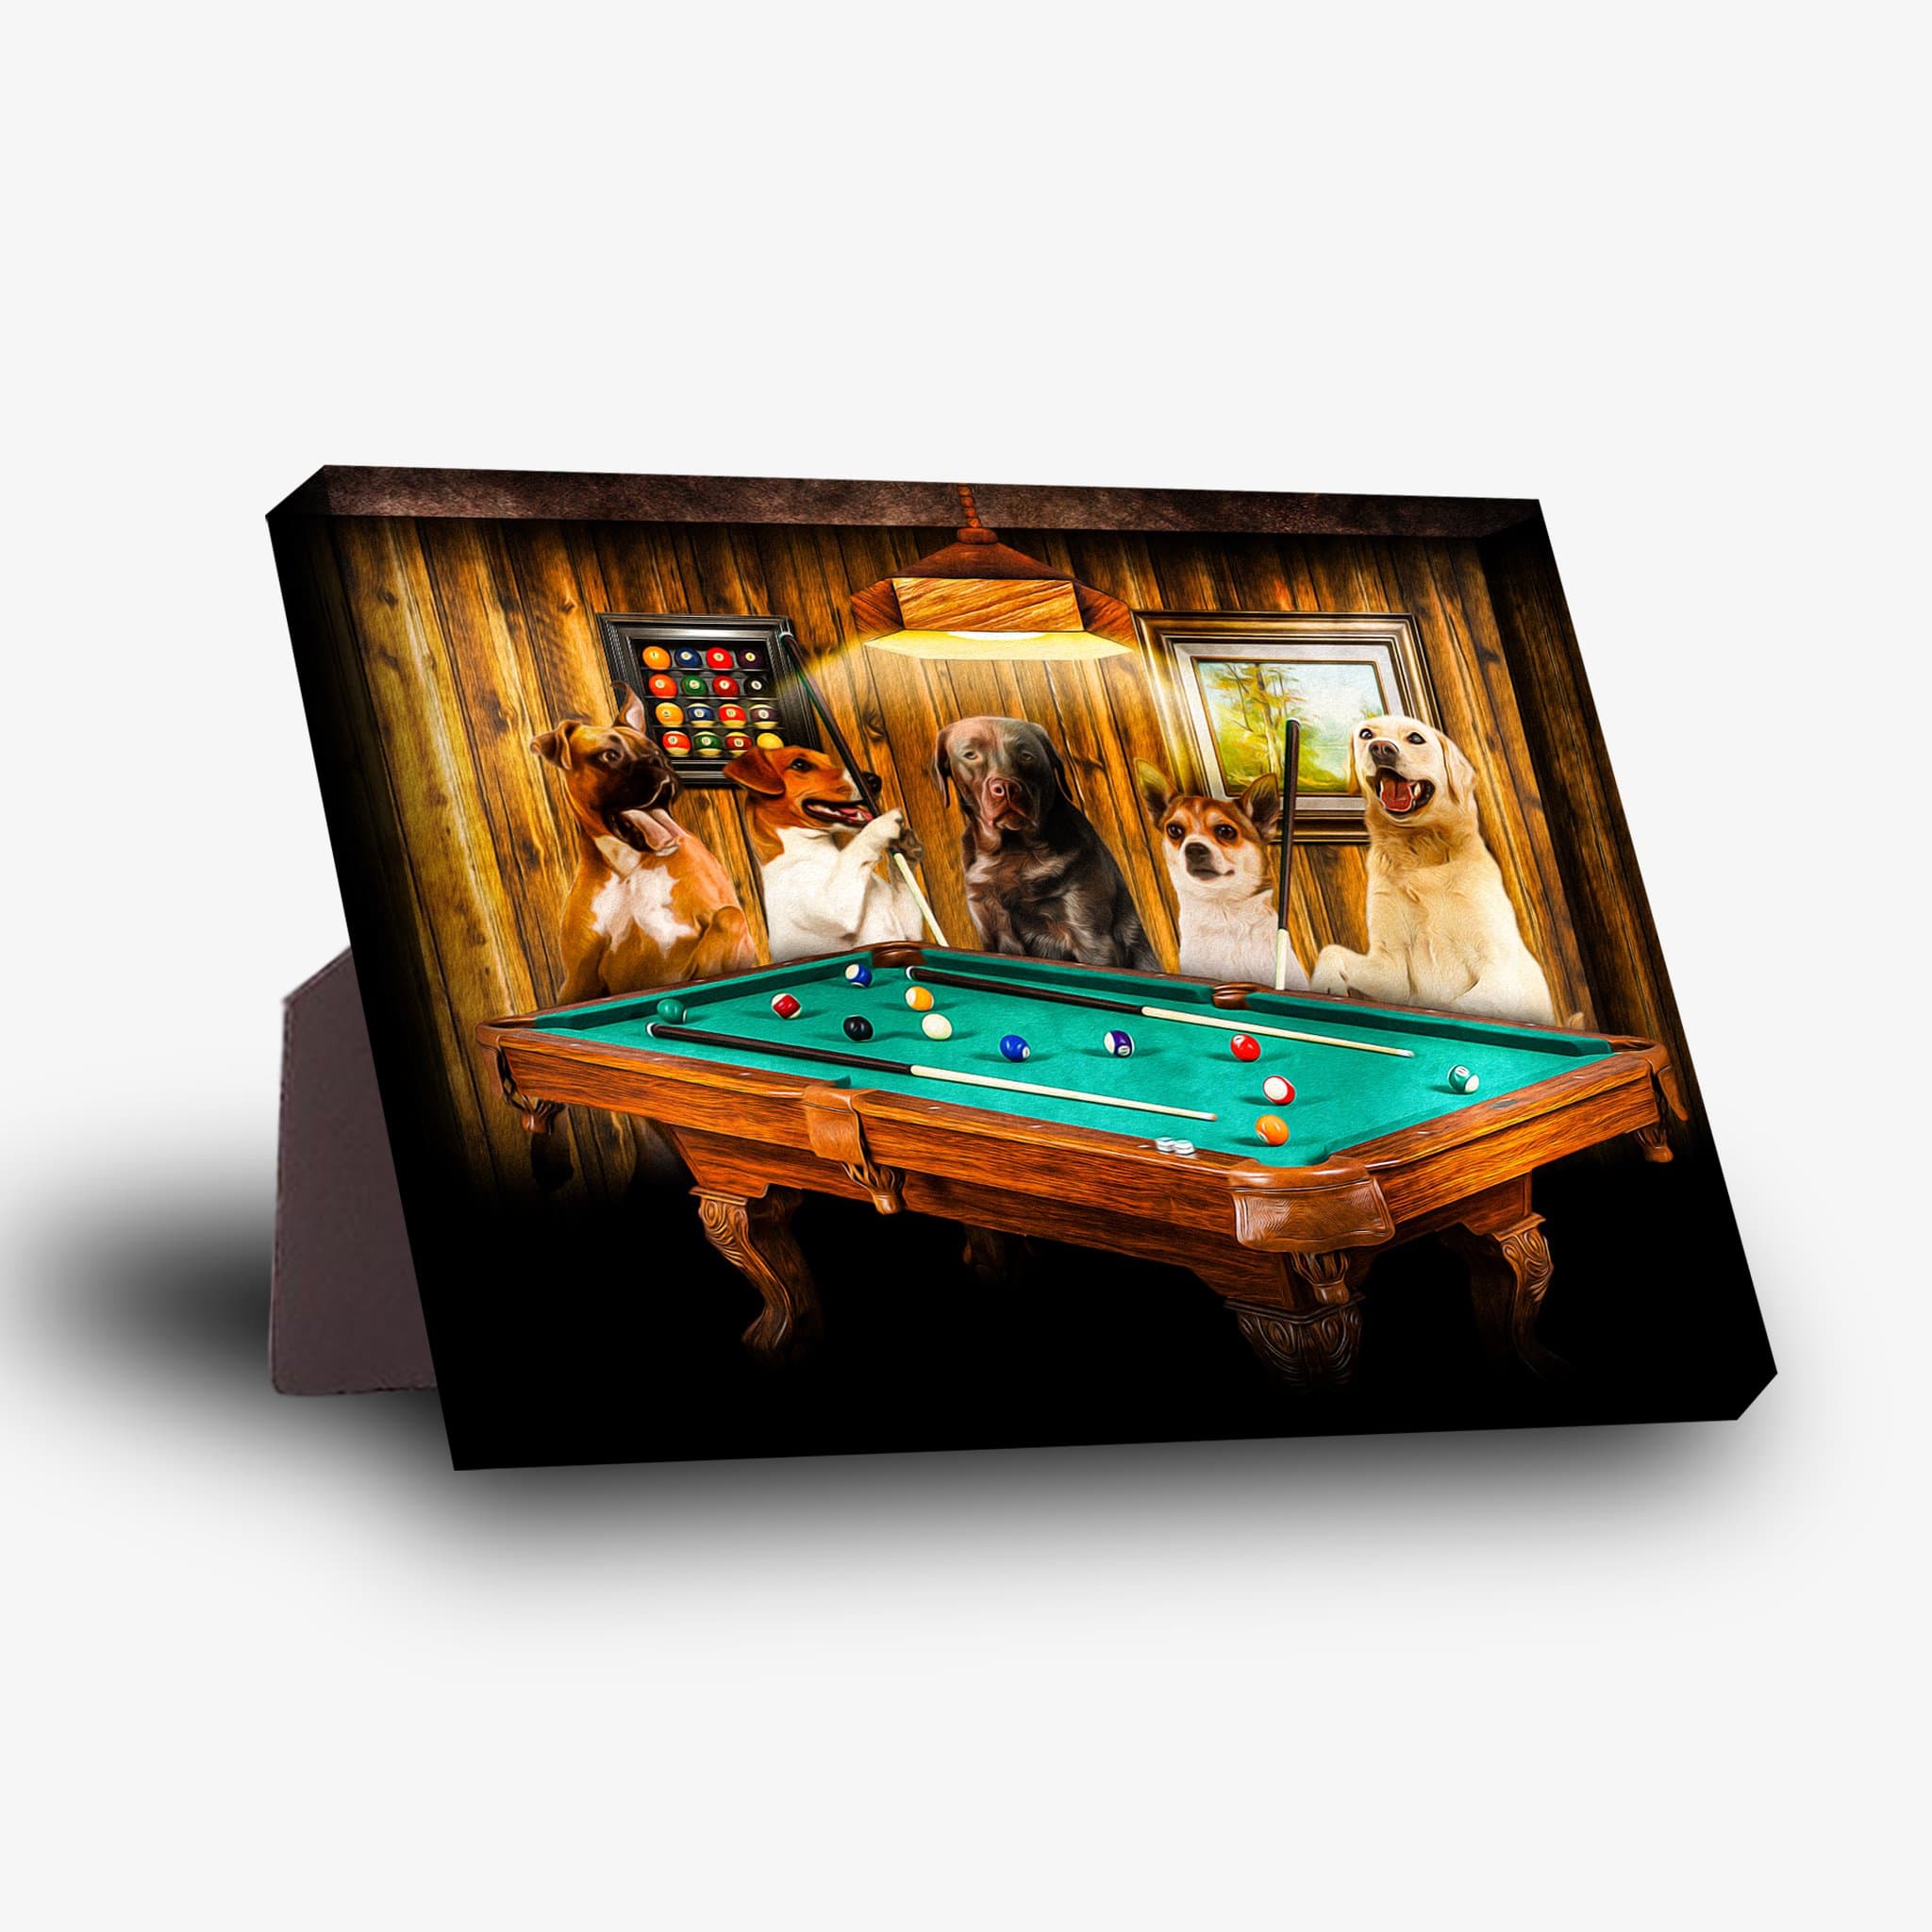 &#39;The Pool Players&#39; Personalized 5 Pet Standing Canvas